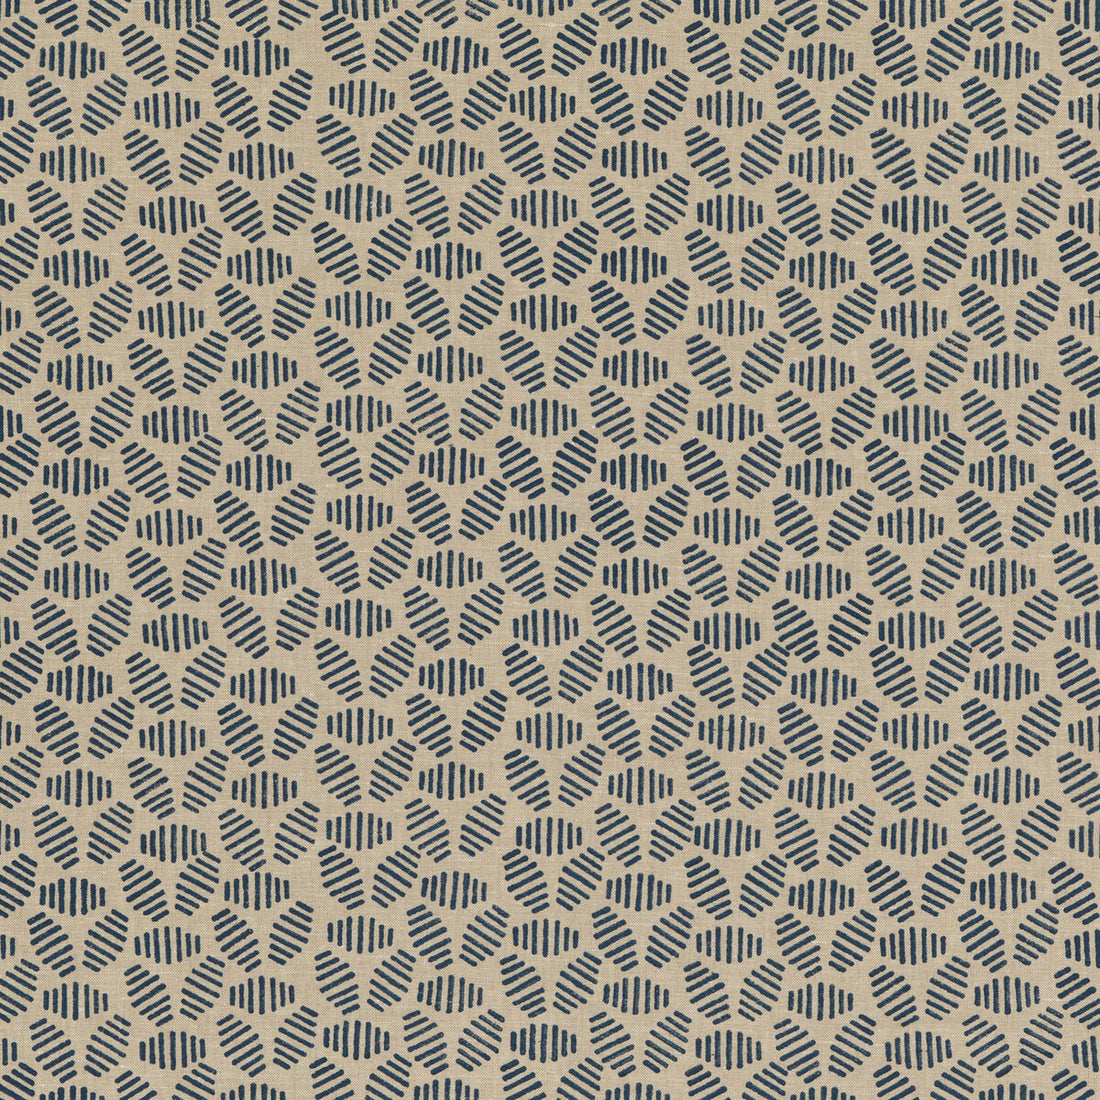 Bumble Bee fabric in indigo color - pattern PP50482.1.0 - by Baker Lifestyle in the Block Party collection